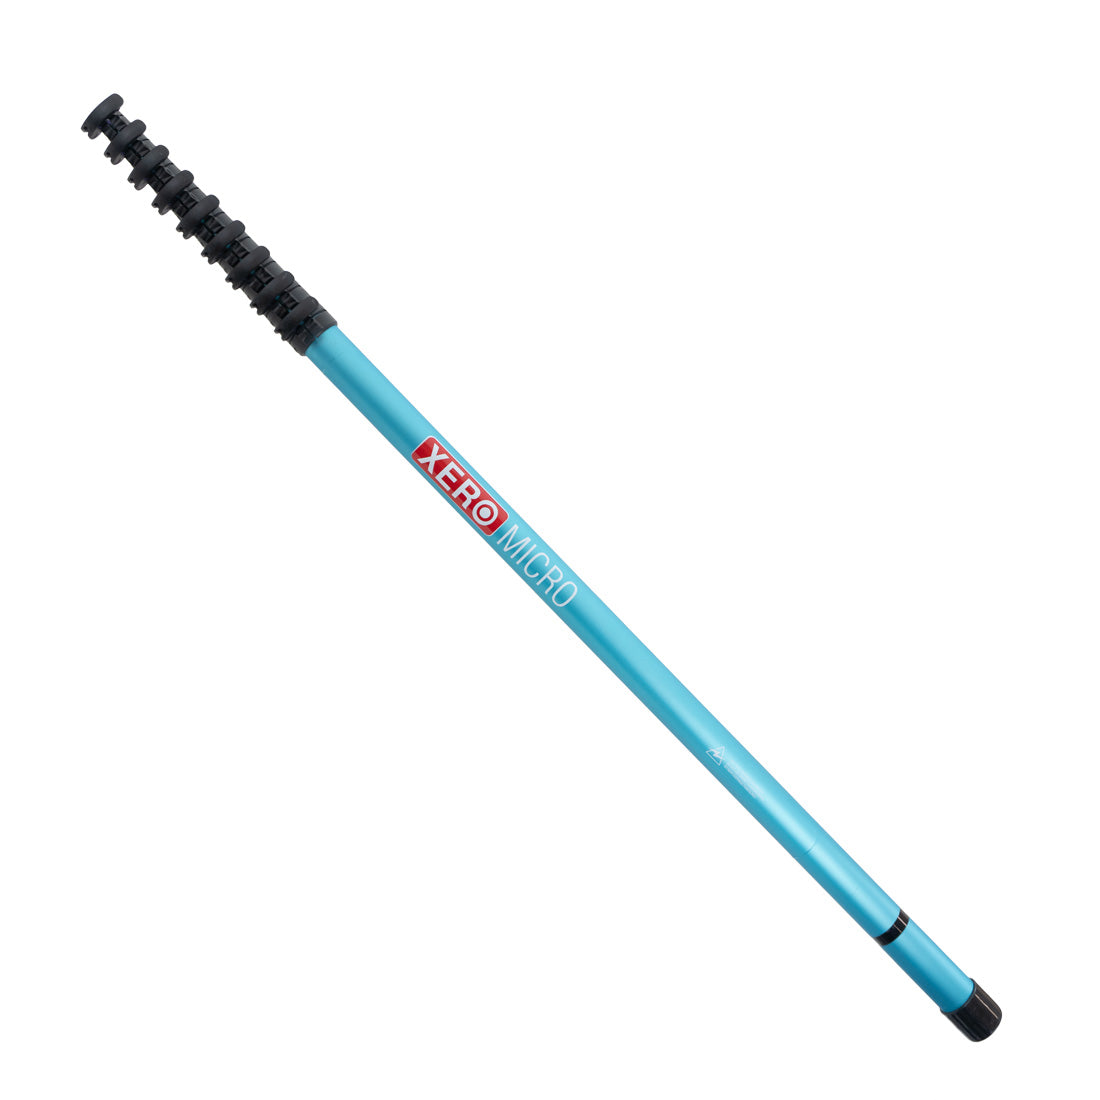 Xero Micro Basic Carbon Fiber Water Fed Pole - 40 Foot, Size: One Size